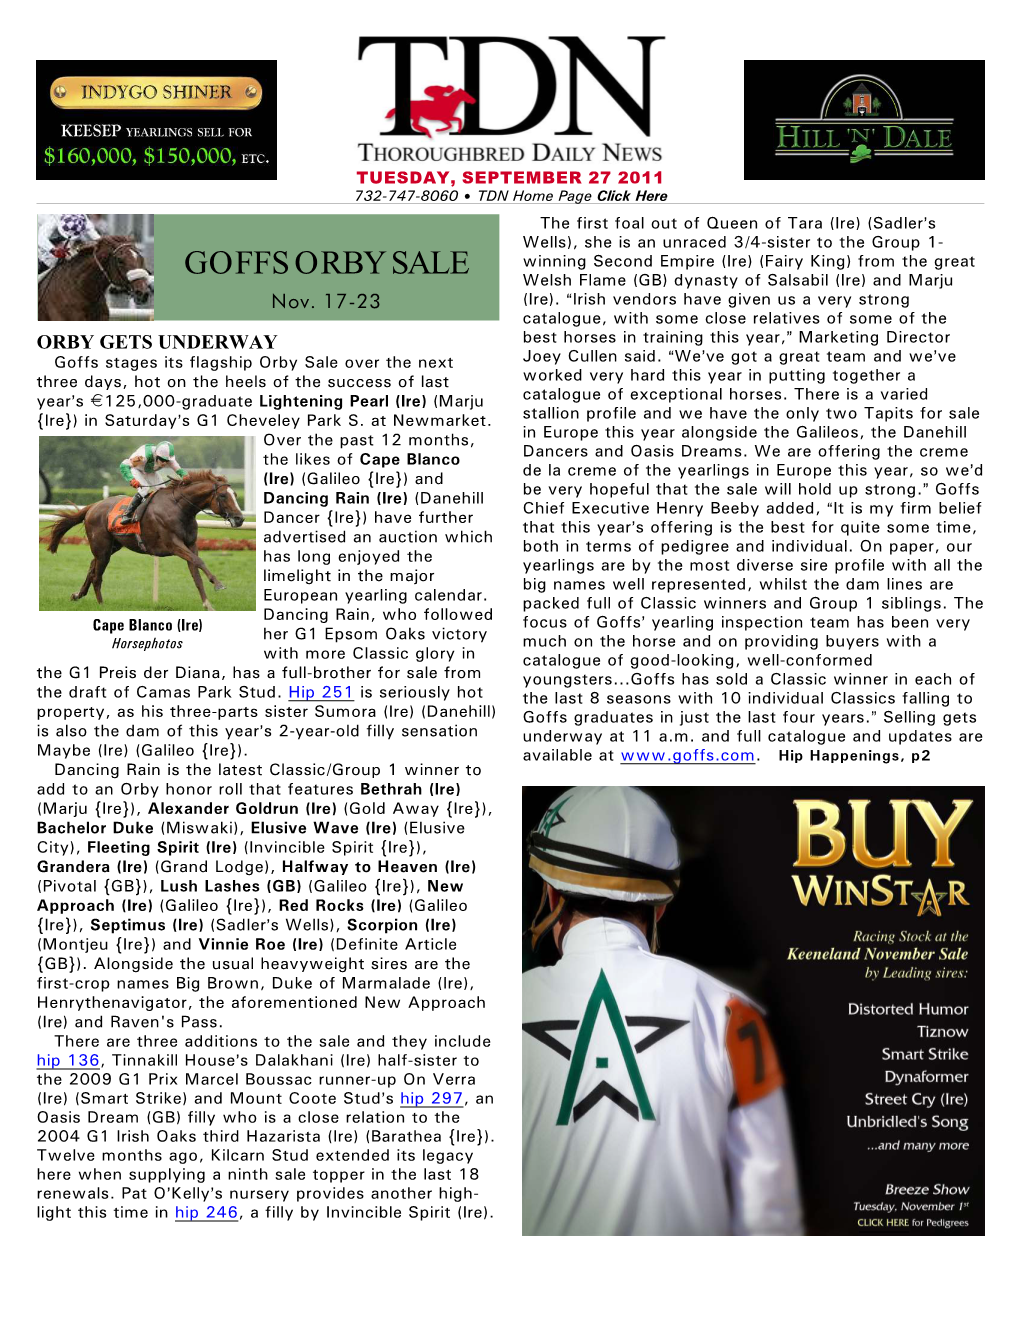 GOFFS ORBY SALE Welsh Flame (GB) Dynasty of Salsabil (Ire) and Marju Nov